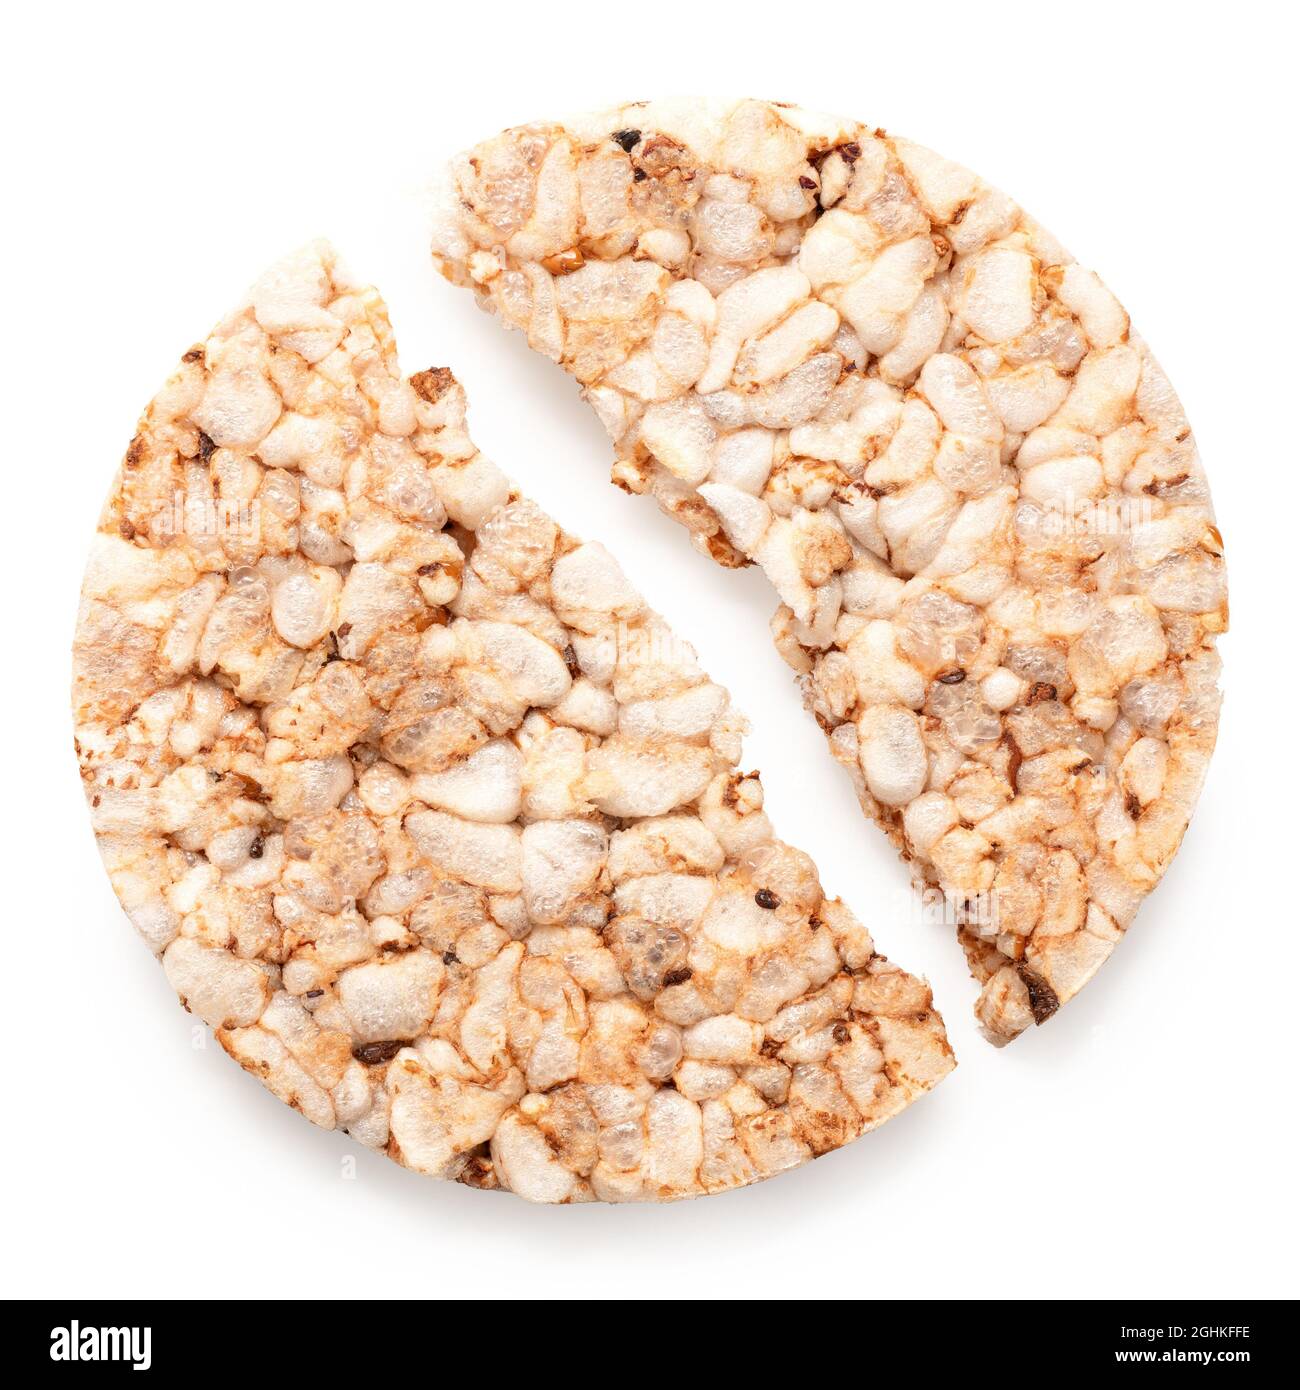 Broken plain puffed brown rice cake isolated on white. Top view. Stock Photo